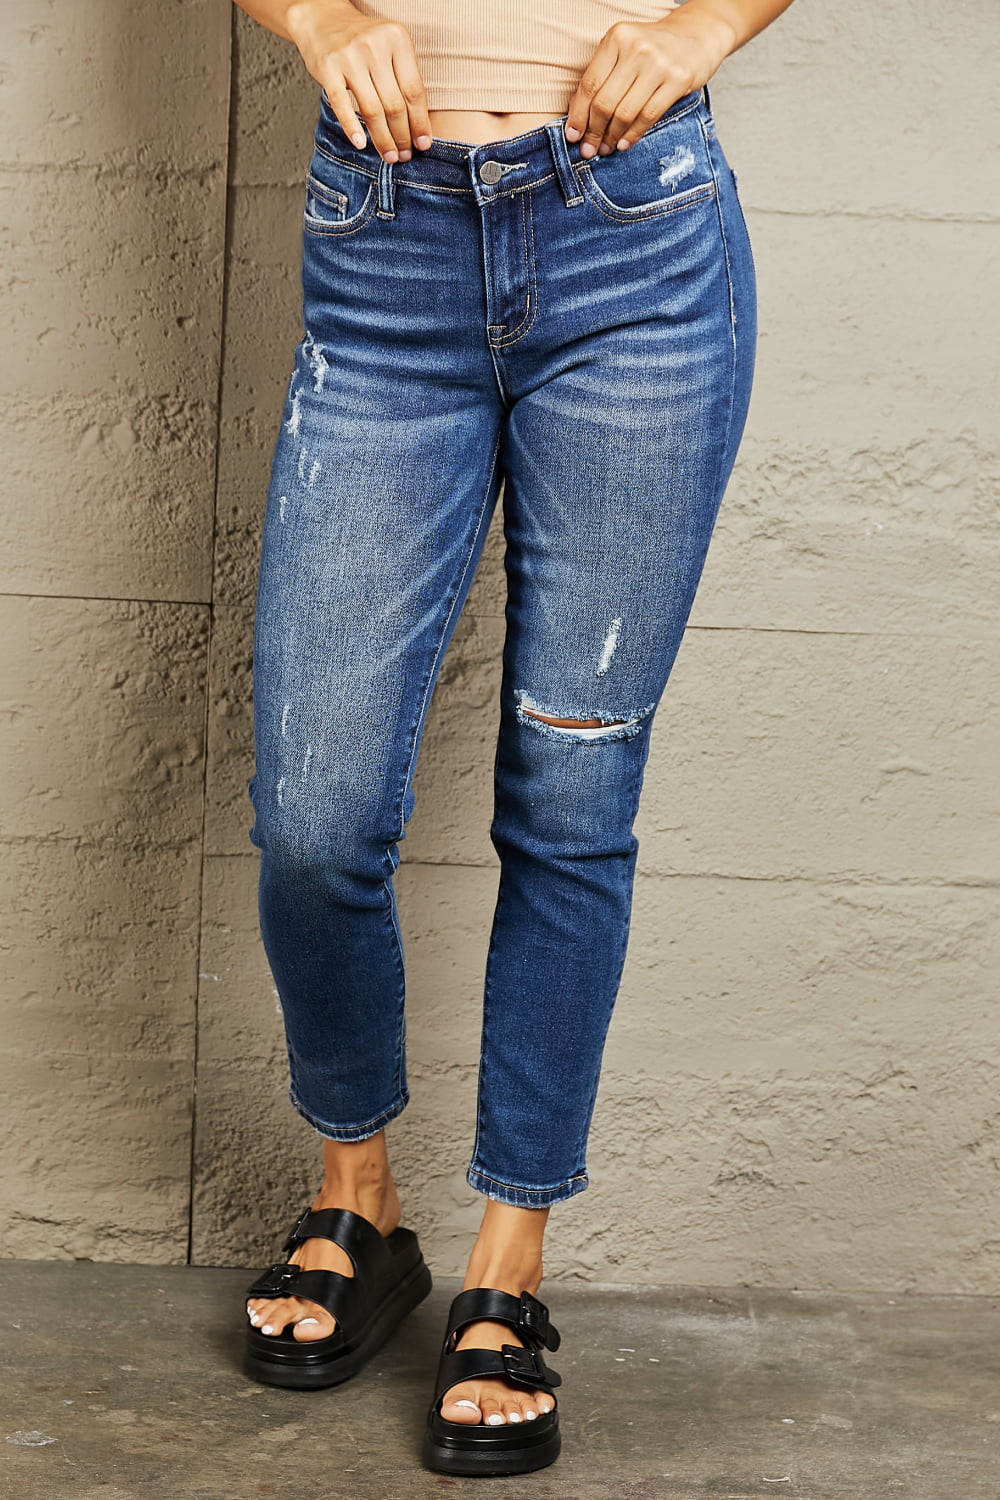 BAYEAS Mid Rise Distressed Slim Jeans - Jeans - FITGGINS